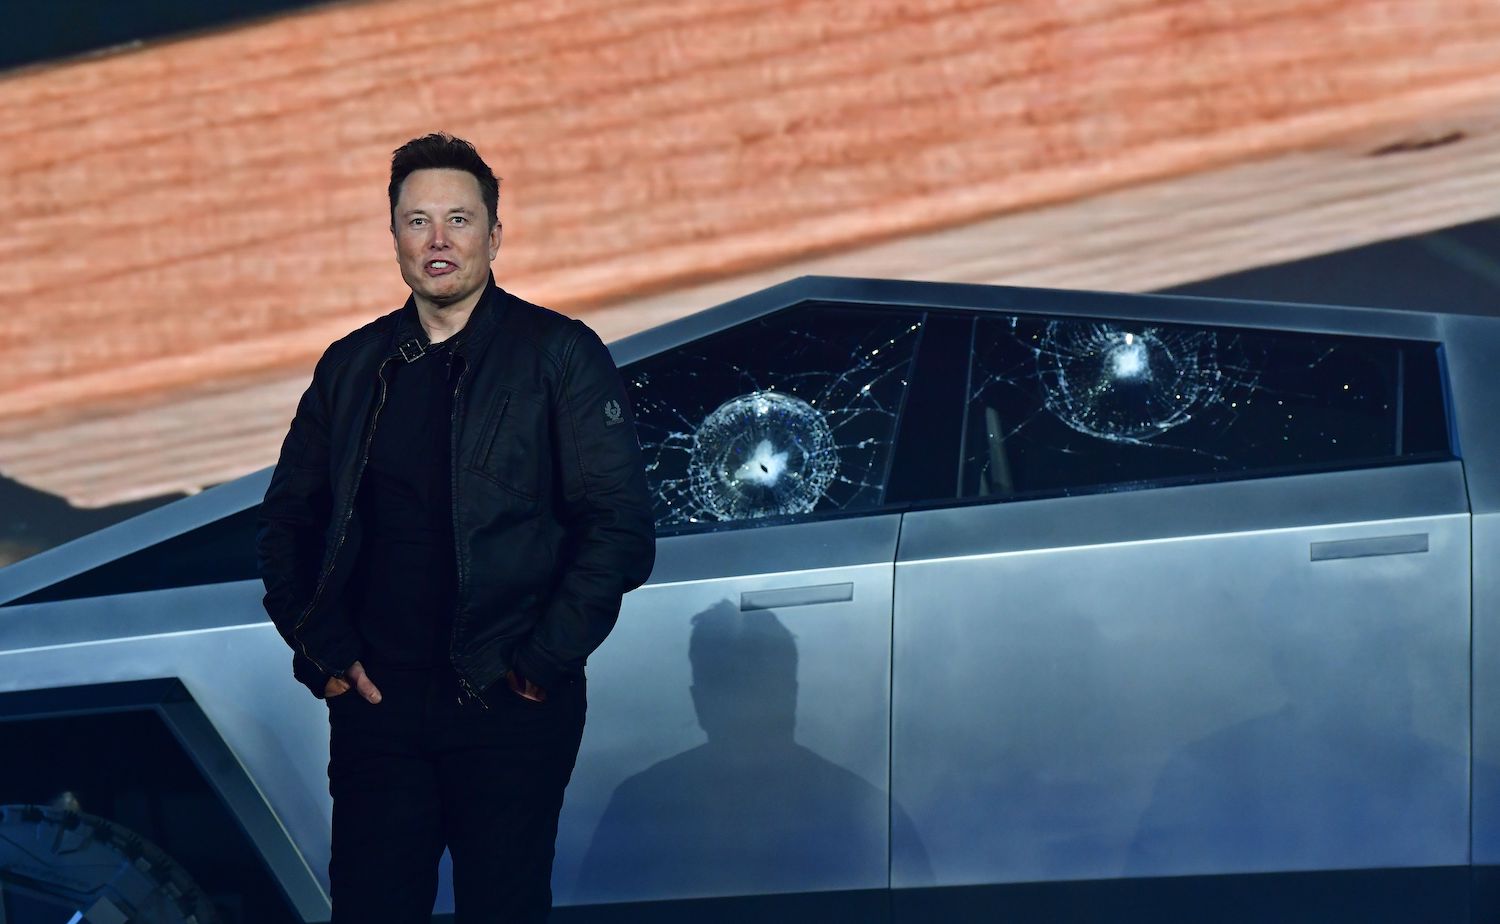 Tesla co-founder and CEO Elon Musk at the Cybertruck unveil. Musk added traditional Cybertruck mirrors instead of Tesla digital mirrors, but insists that owners can easily remove them. FREDERIC J. BROWN/AFP via Getty Images